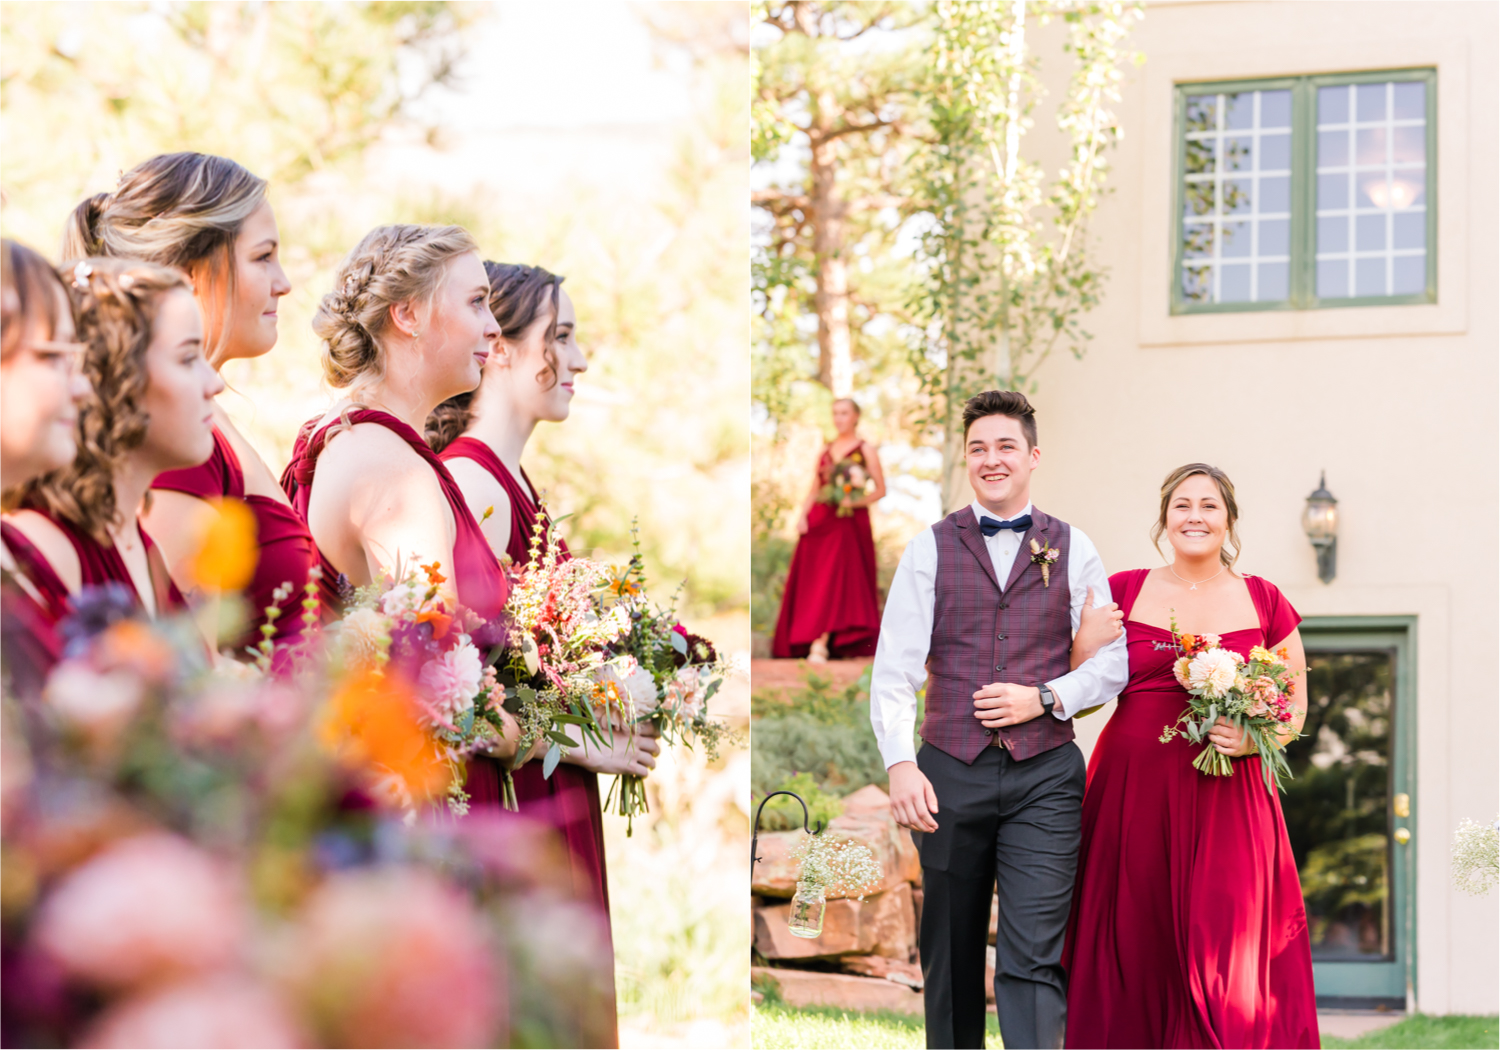 Romantic Whimsical Wedding at the Lionscrest Manor in Lyons, CO | Britni Girard Photography - Wedding Photo and Video Team | Rustic Fall Decor mixed in Burgundy, Blush, Gold and Sage | Wedding Dress from Anna Be Bridal by Hailey Paige | Hair and Makeup by Glam 5280 Chaundra Revier | Florals by Aflorae | Ceremony Site overlooking the Rocky Mountains | Mountaintop Ceremony